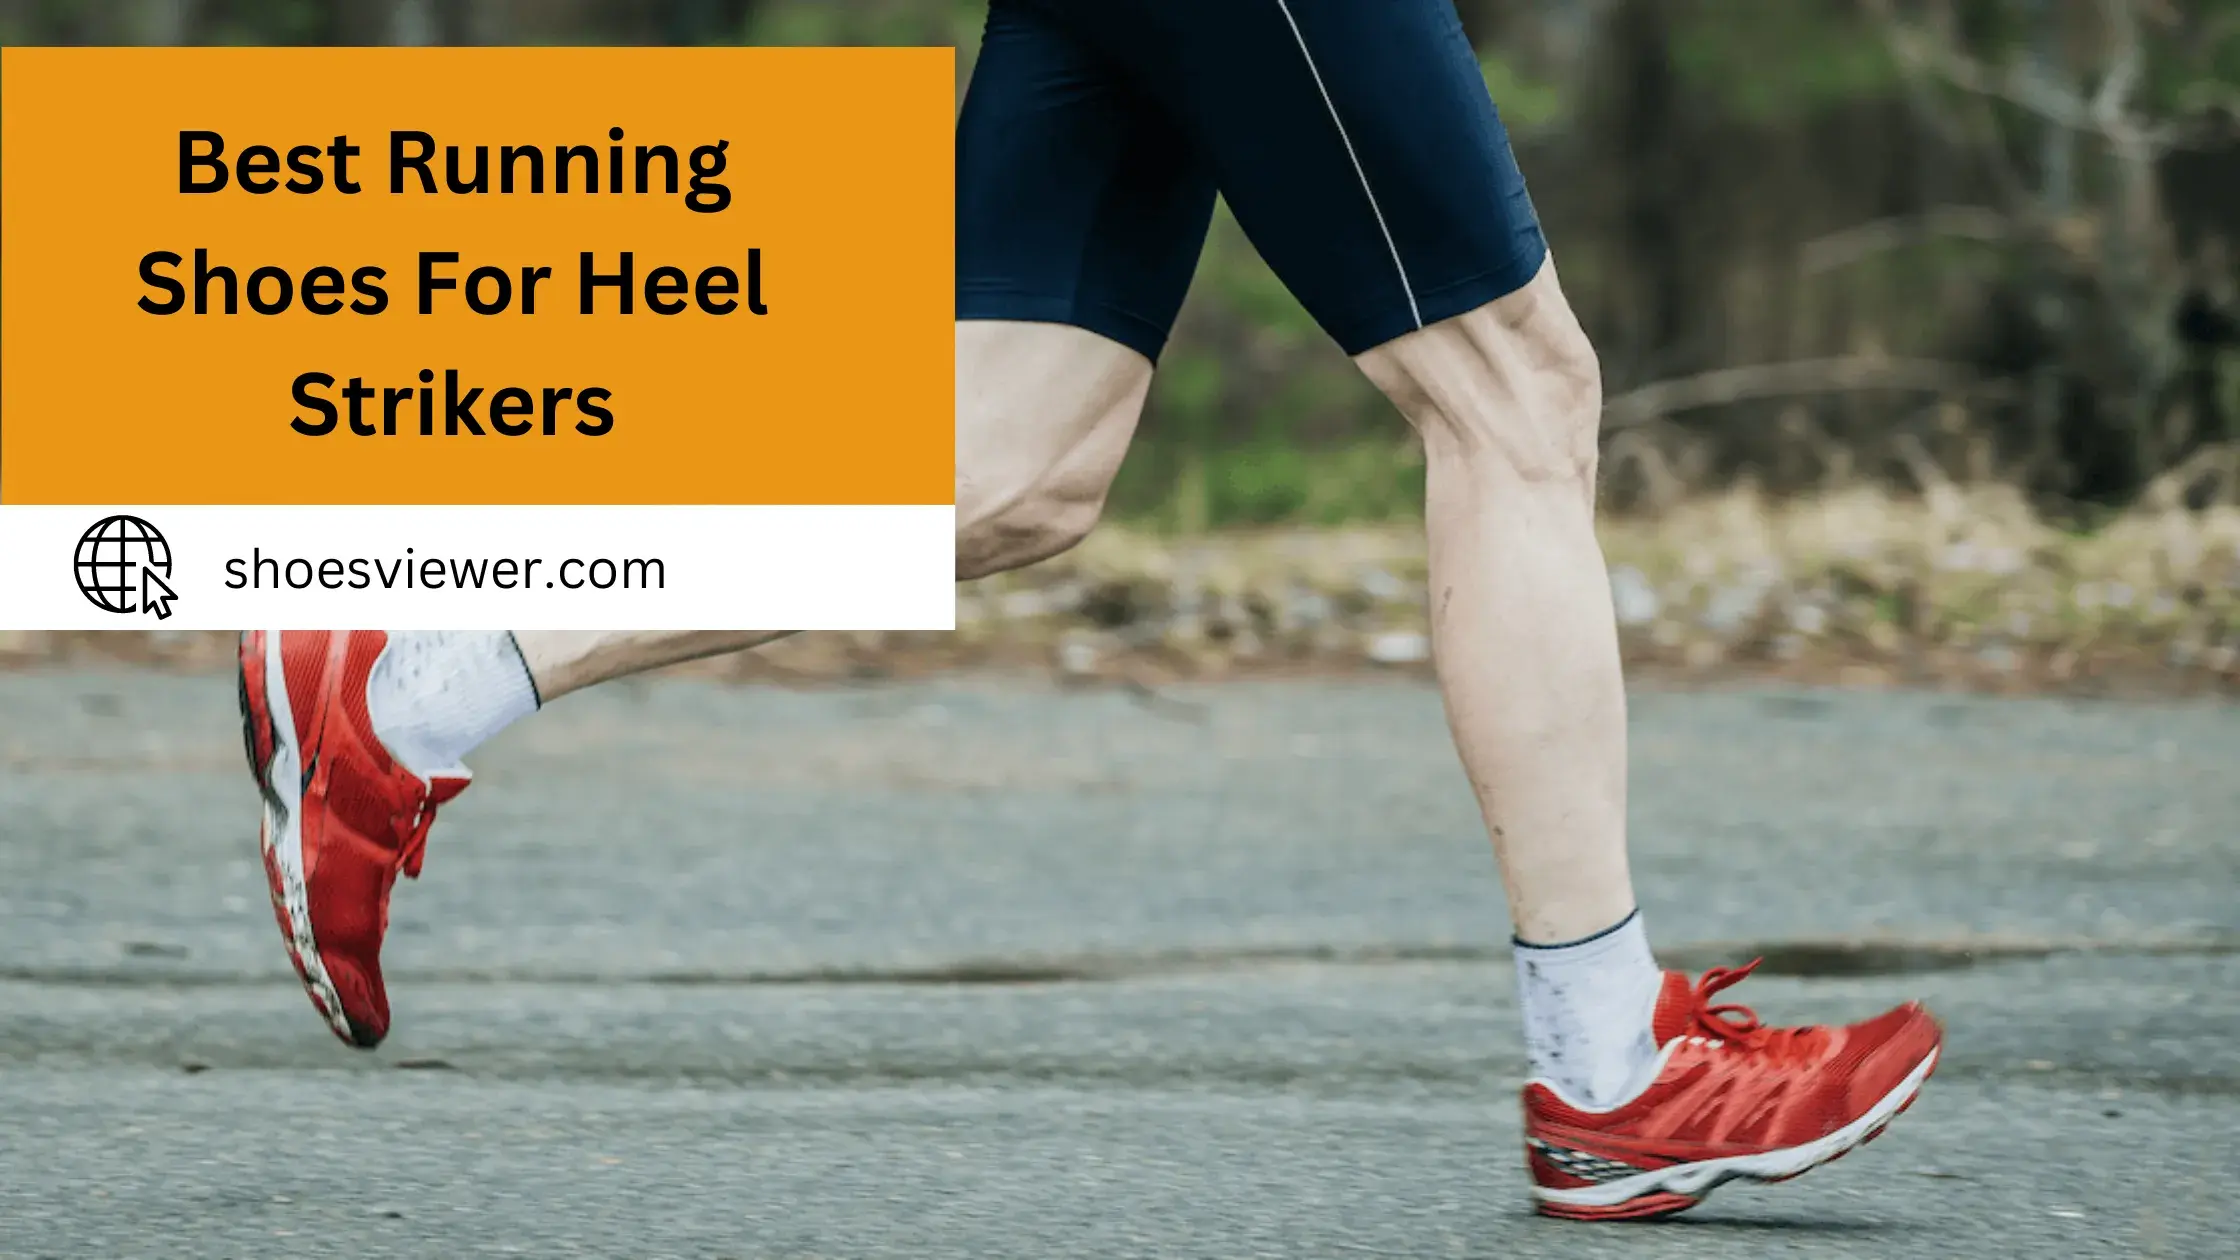 Best Running Shoes For Heel Strikers - Complete Guide